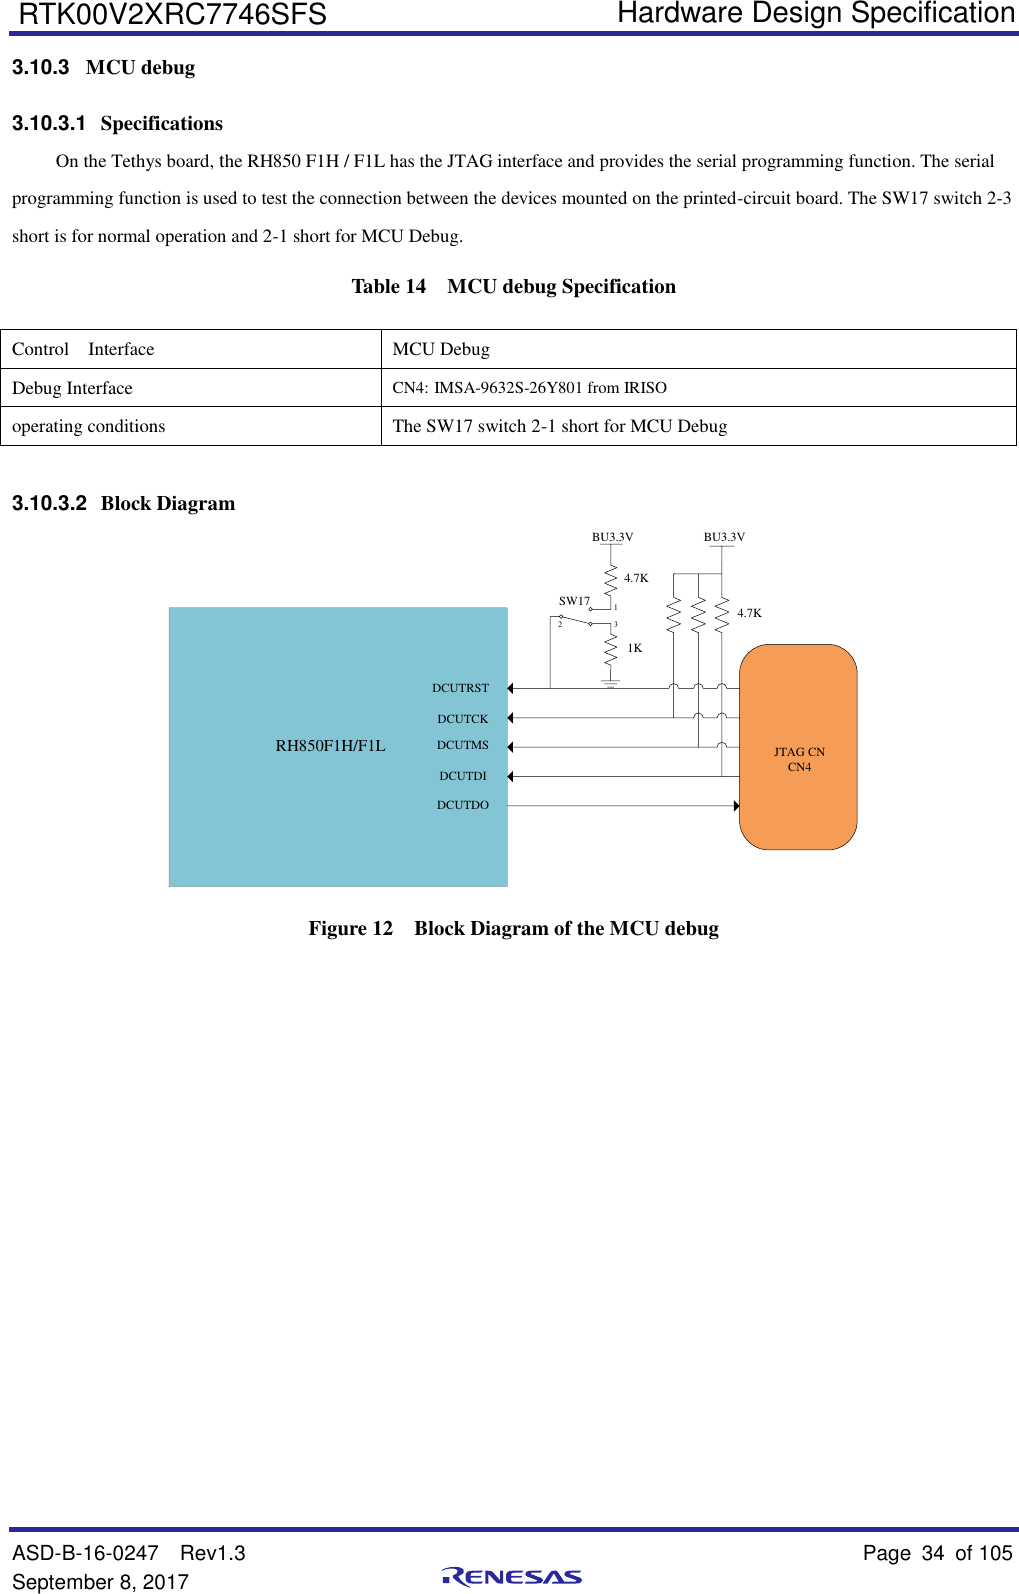   Hardware Design Specification ASD-B-16-0247  Rev1.3    Page 34  of 105 September 8, 2017      RTK00V2XRC7746SFS 3.10.3  MCU debug 3.10.3.1  Specifications On the Tethys board, the RH850 F1H / F1L has the JTAG interface and provides the serial programming function. The serial programming function is used to test the connection between the devices mounted on the printed-circuit board. The SW17 switch 2-3 short is for normal operation and 2-1 short for MCU Debug. Table 14  MCU debug Specification Control  Interface MCU Debug Debug Interface CN4: IMSA-9632S-26Y801 from IRISO operating conditions The SW17 switch 2-1 short for MCU Debug  3.10.3.2  Block Diagram DCUTCKDCUTMS  DCUTRST BU3.3VDCUTDODCUTDI 4.7KRH850F1H/F1L JTAG CNCN4BU3.3V4.7K1KSW17312 Figure 12  Block Diagram of the MCU debug               